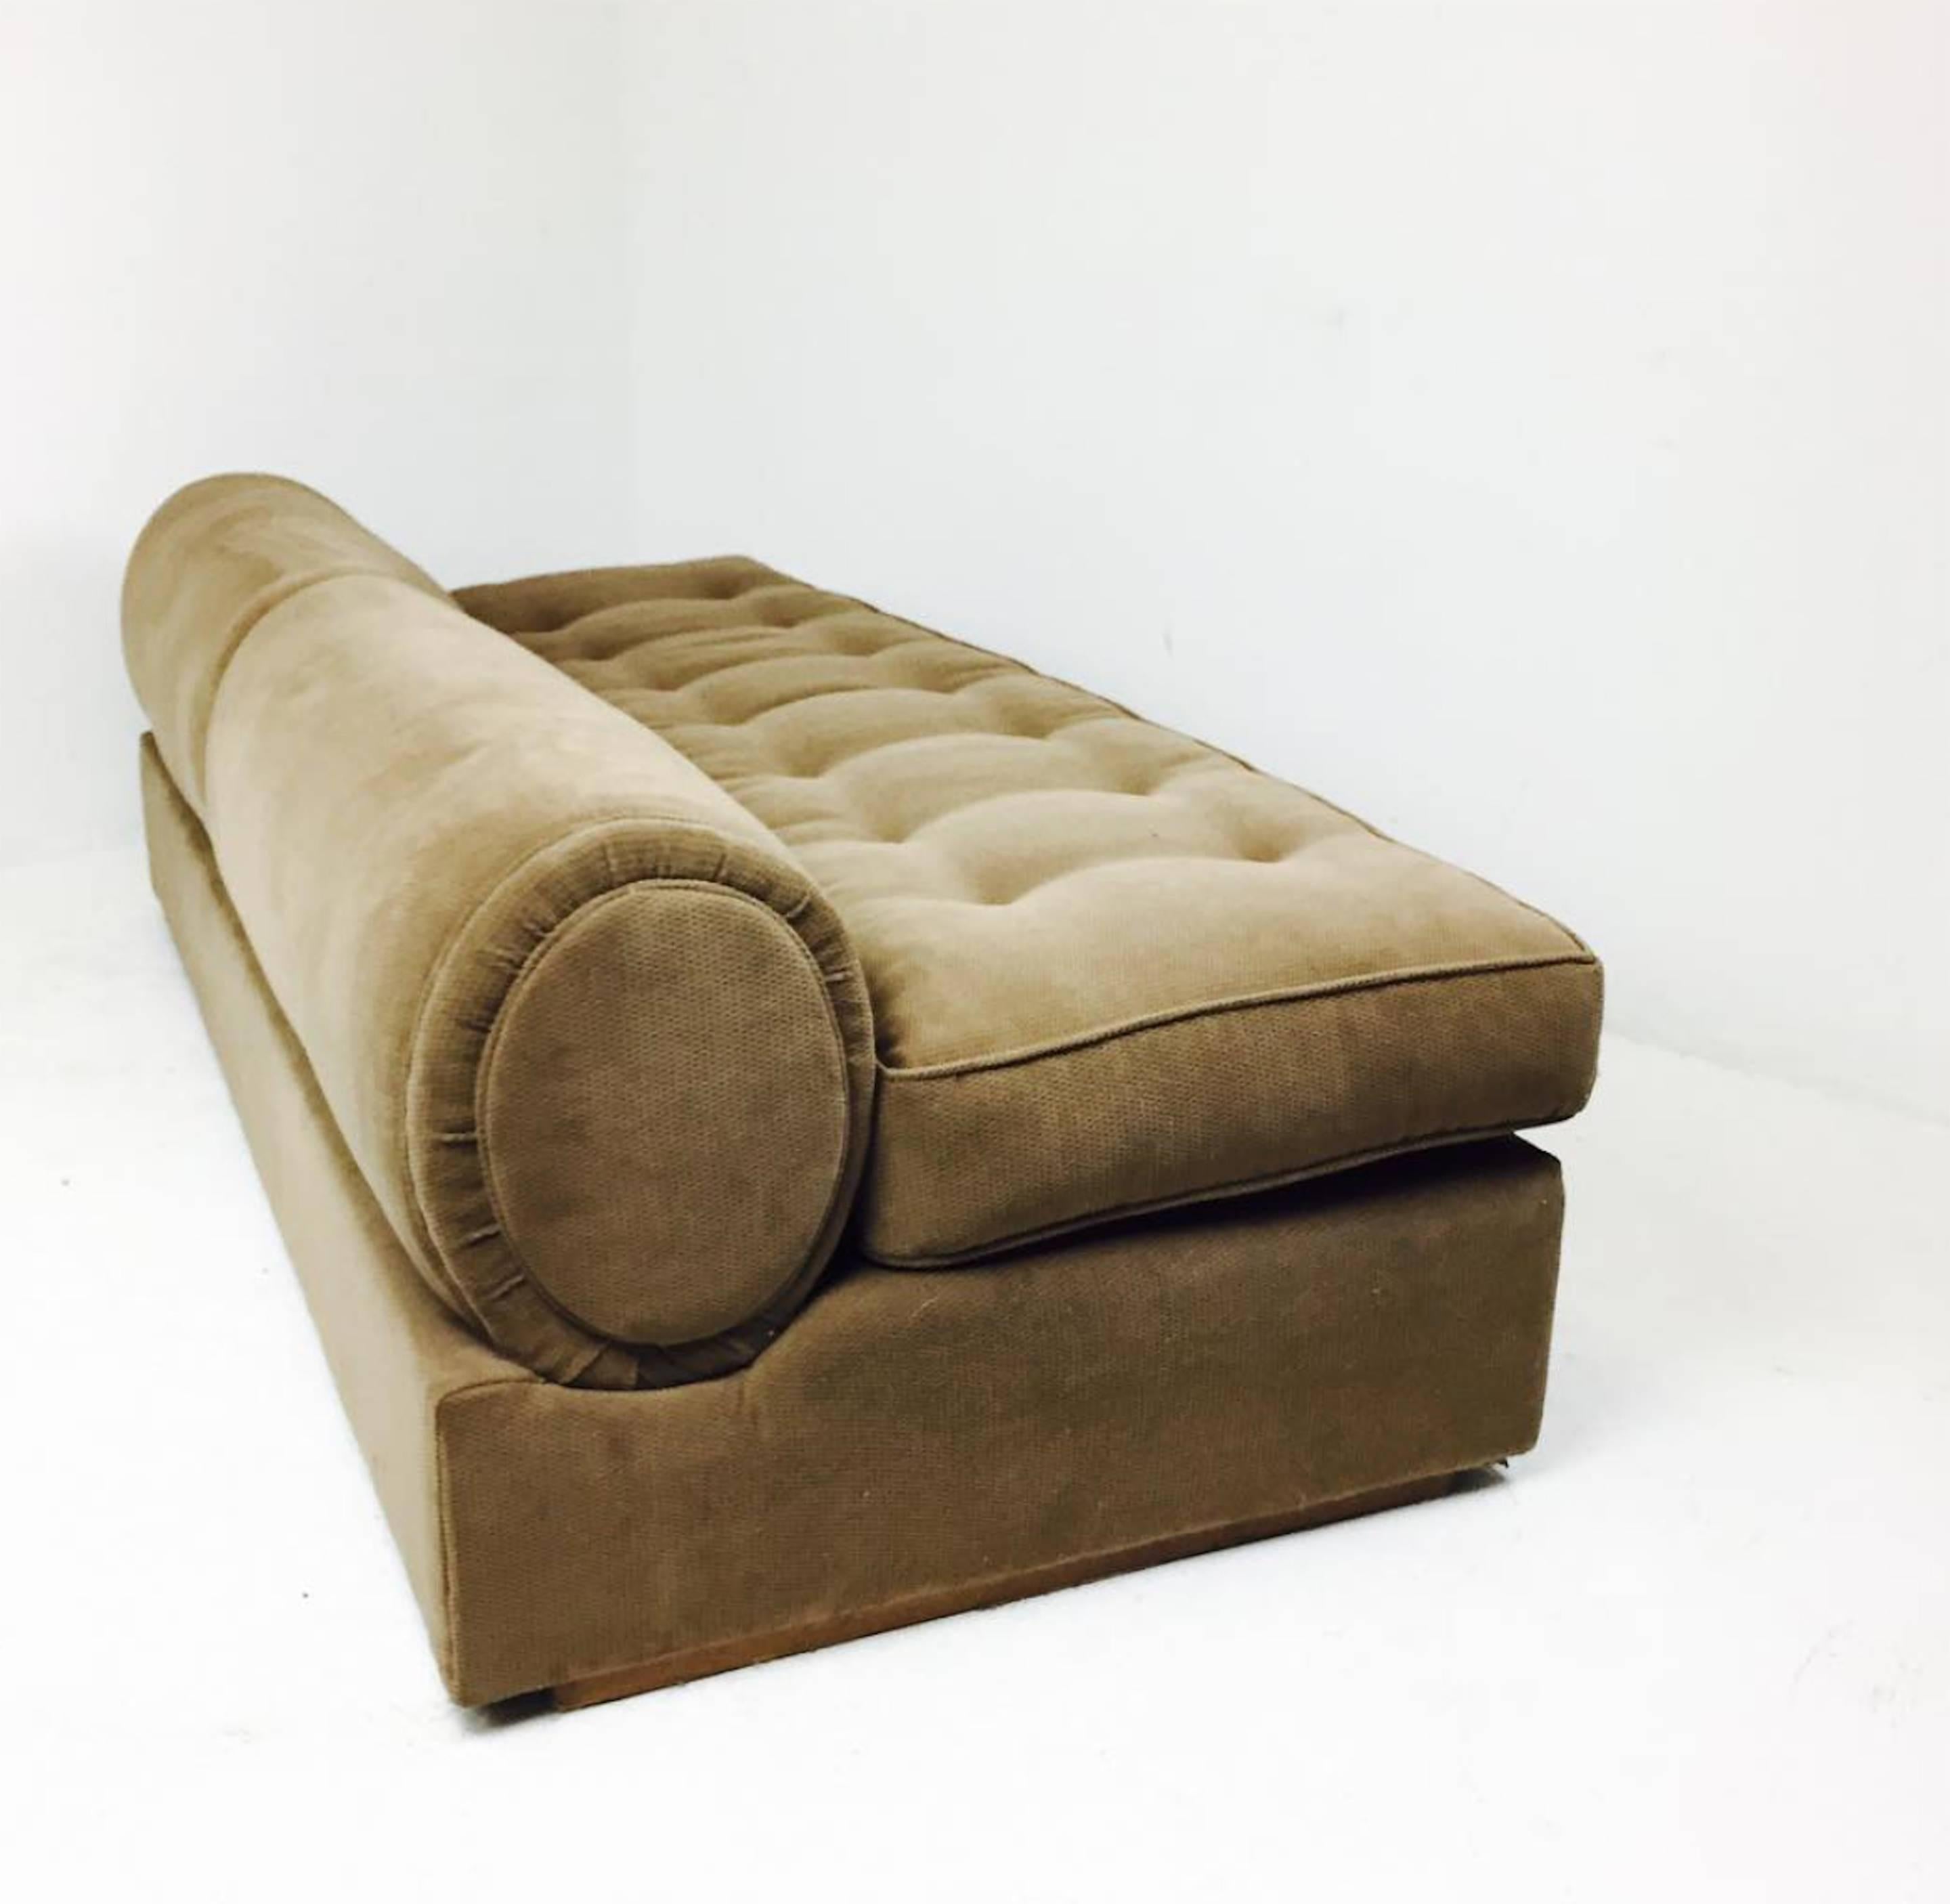 Modern style bolster back slipper sofa or daybed in the style of Milo Baughman. Sofa is in good vintage condition with minimal wear, but new upholstery and refinishing is recommended, circa 1970s. 

Dimensions: 84